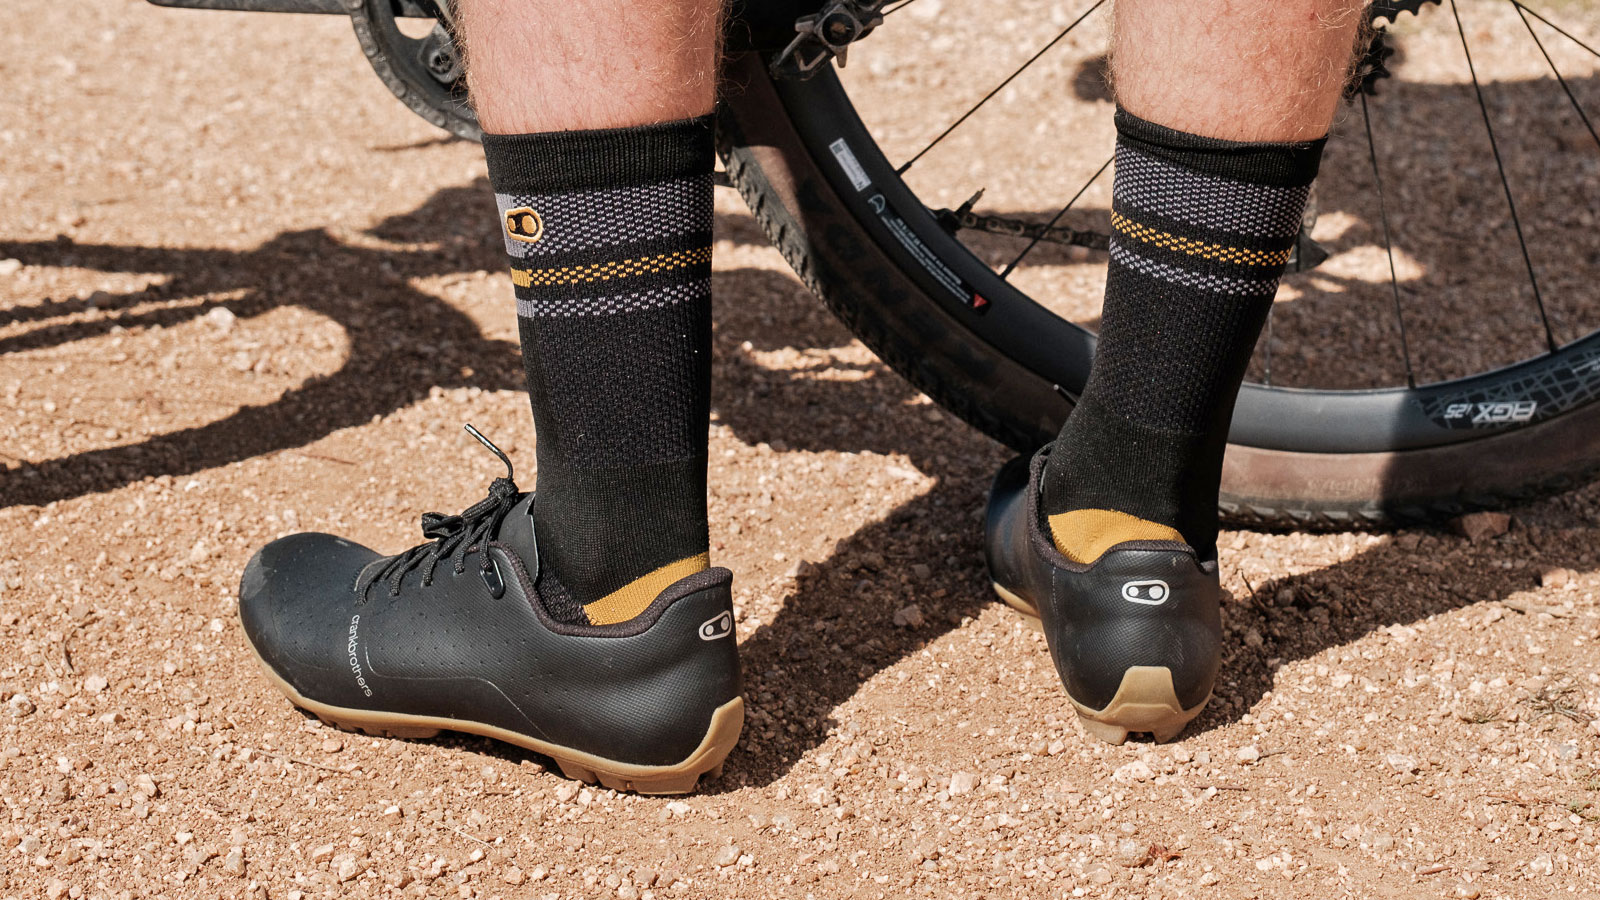 Crankbrothers Candy Lace Shoes are Ready for Gravel or XC Adventures ...